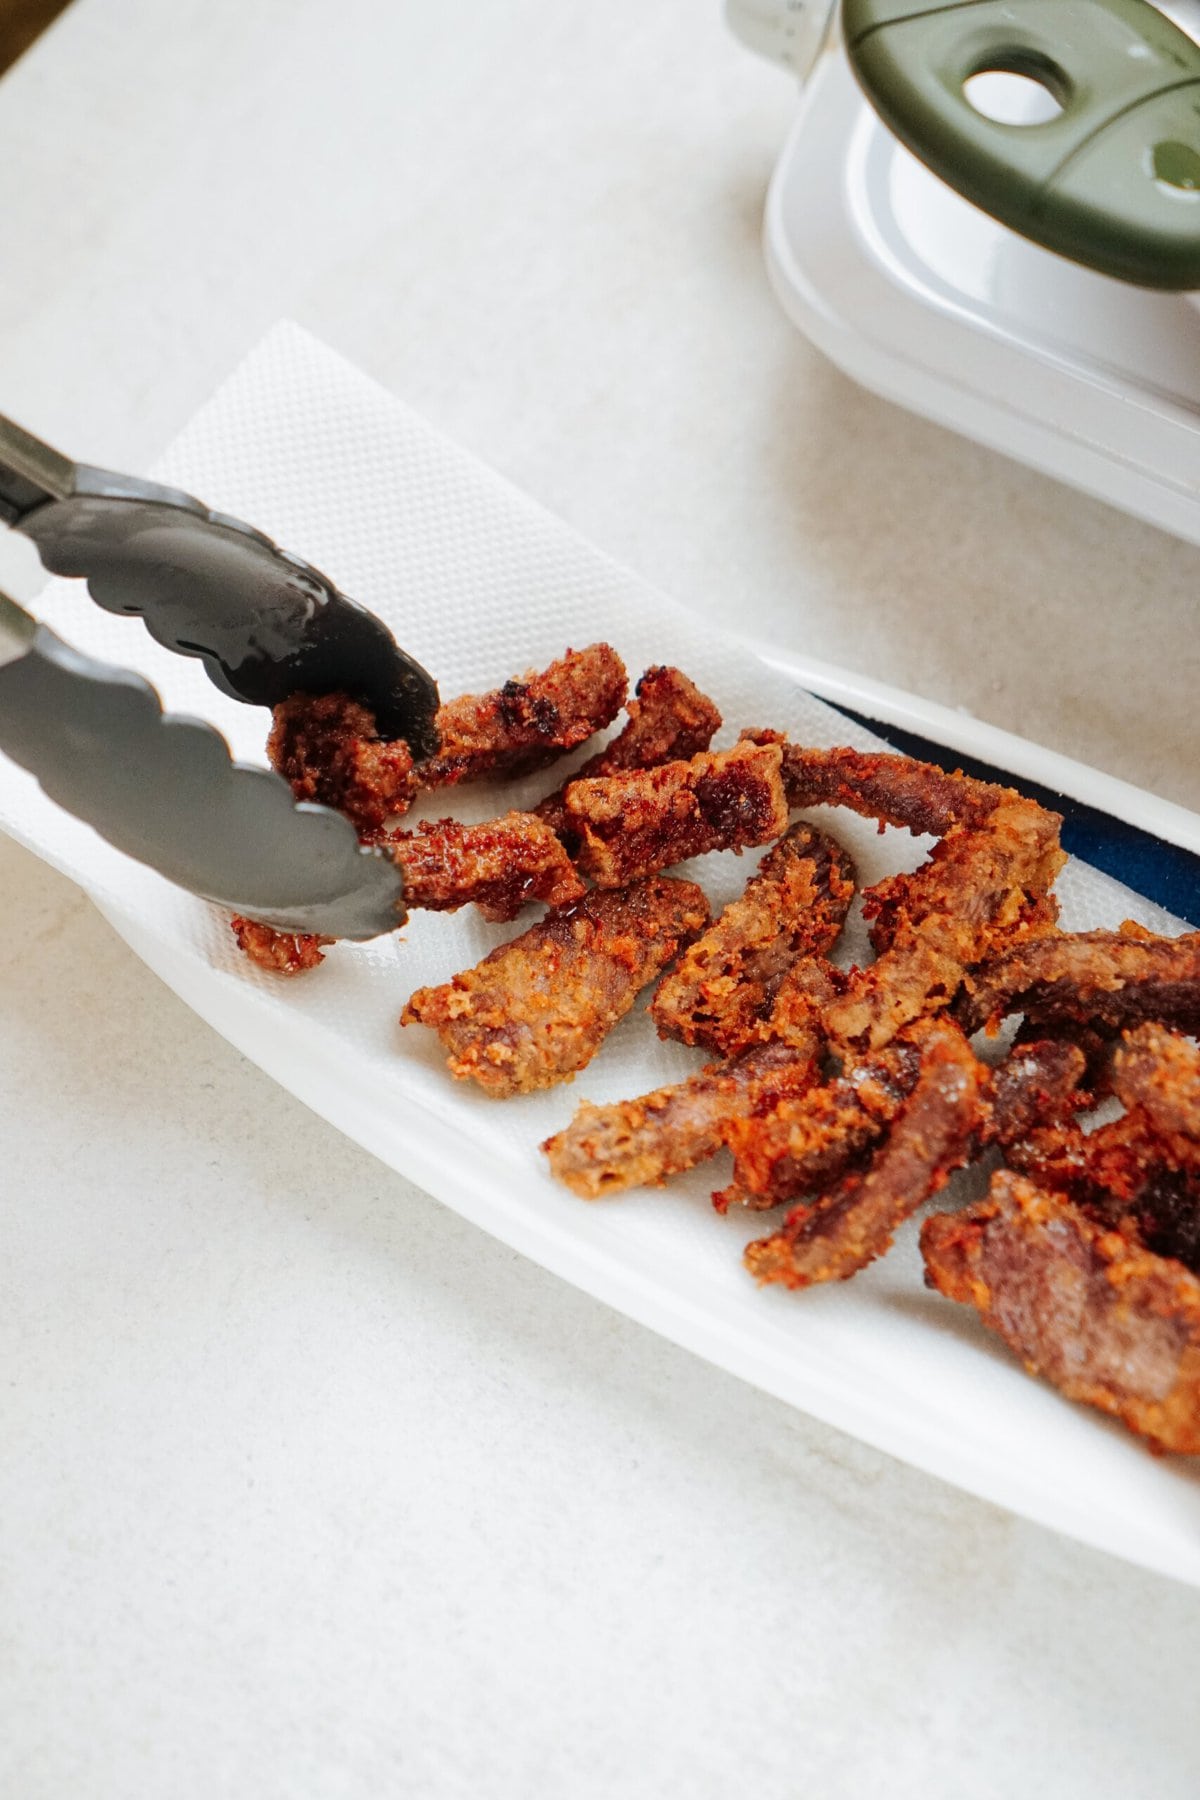 Tongs picking up pieces of fried beef from a paper towel-lined plate on a countertop, with a kitchen appliance in the background.